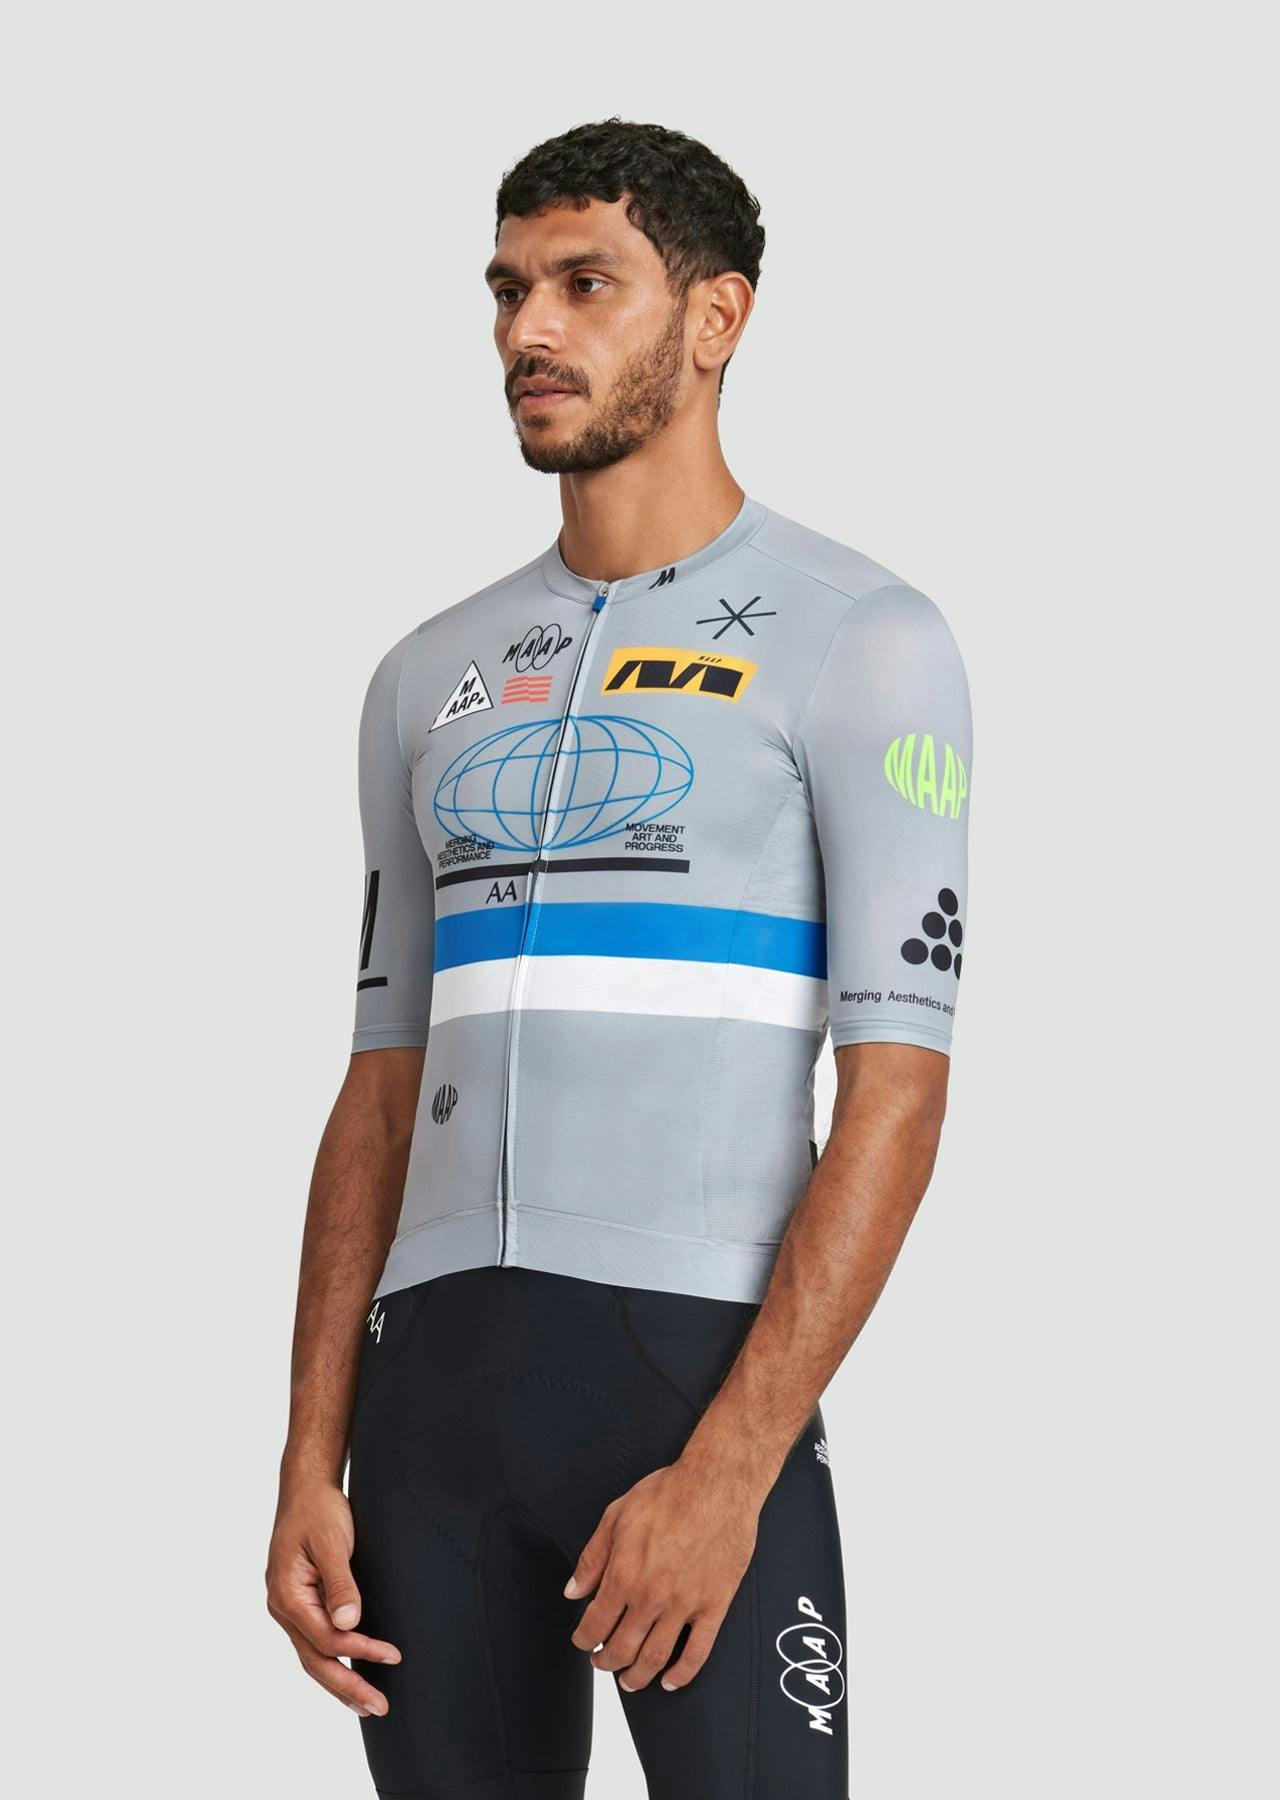 Axis Pro Jersey